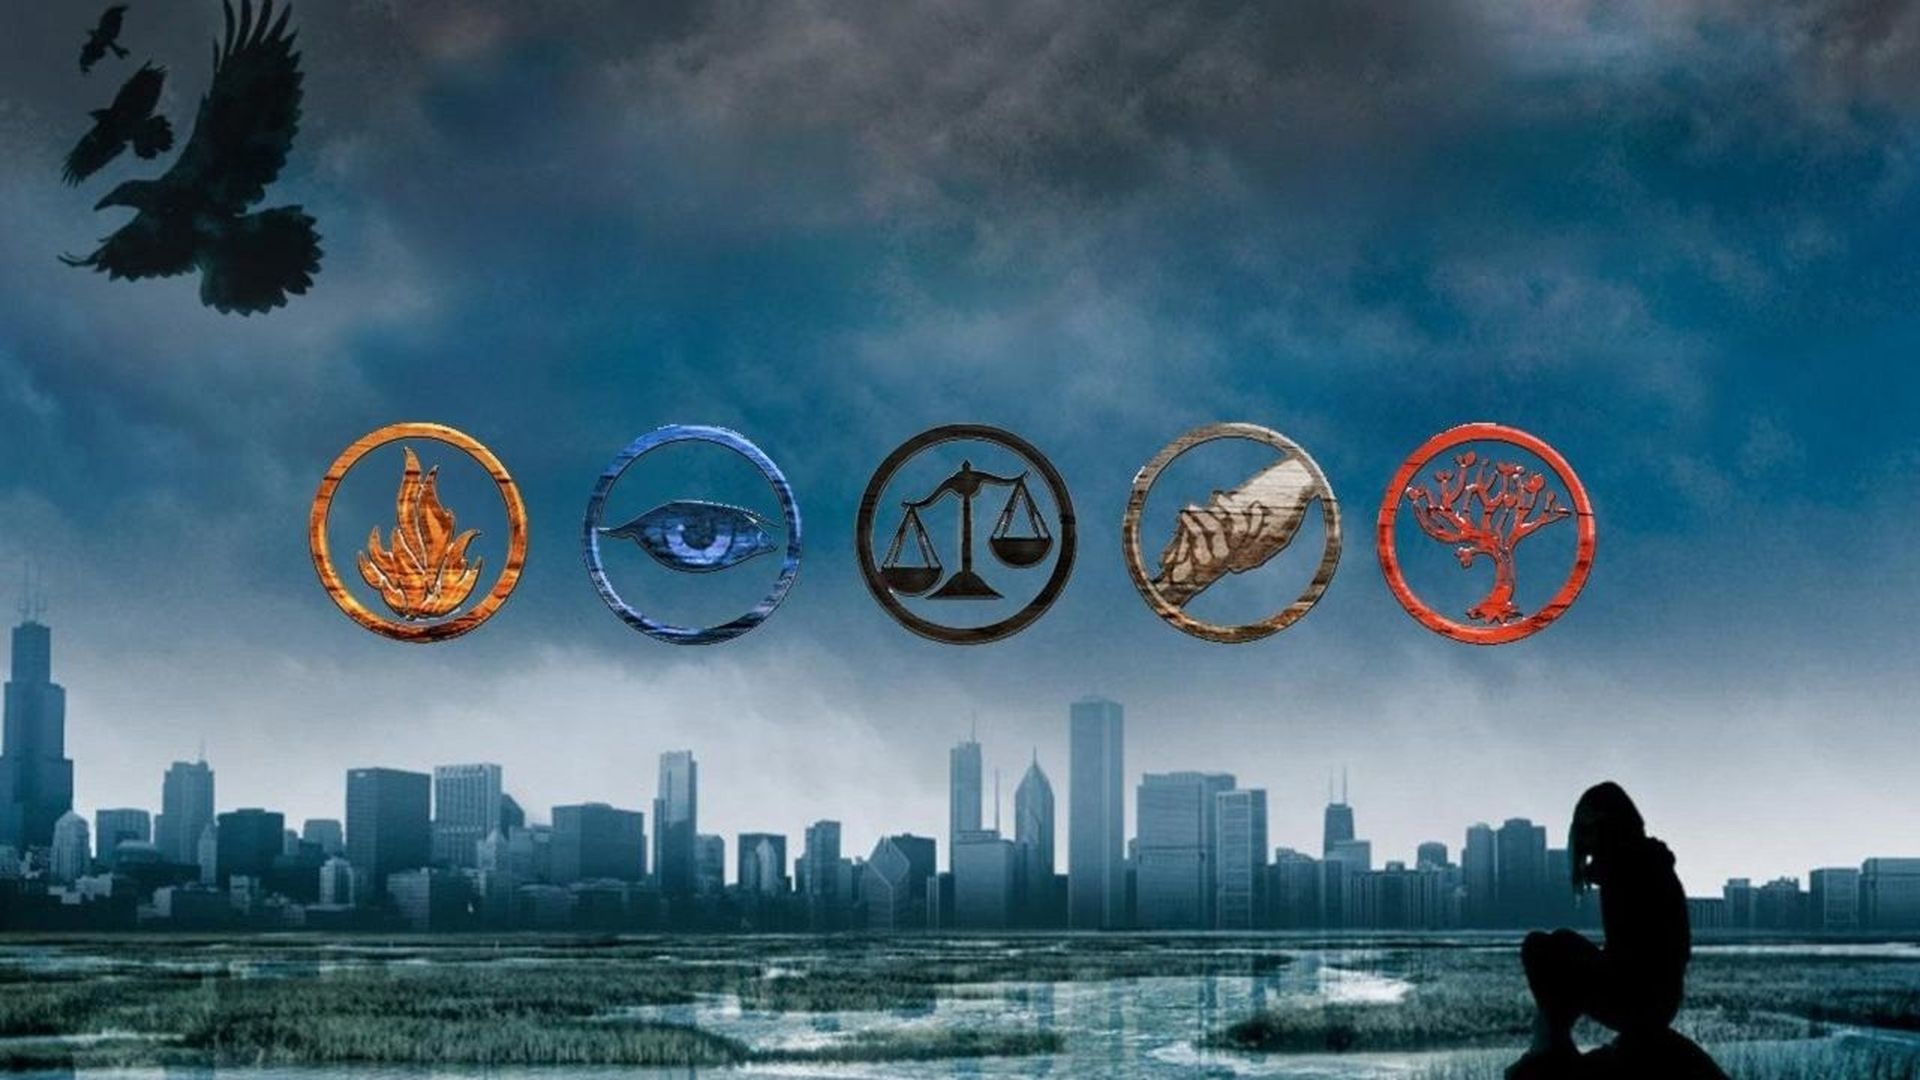 Divergent, Factions quiz, Personality test, Howstuffworks, 1920x1080 Full HD Desktop